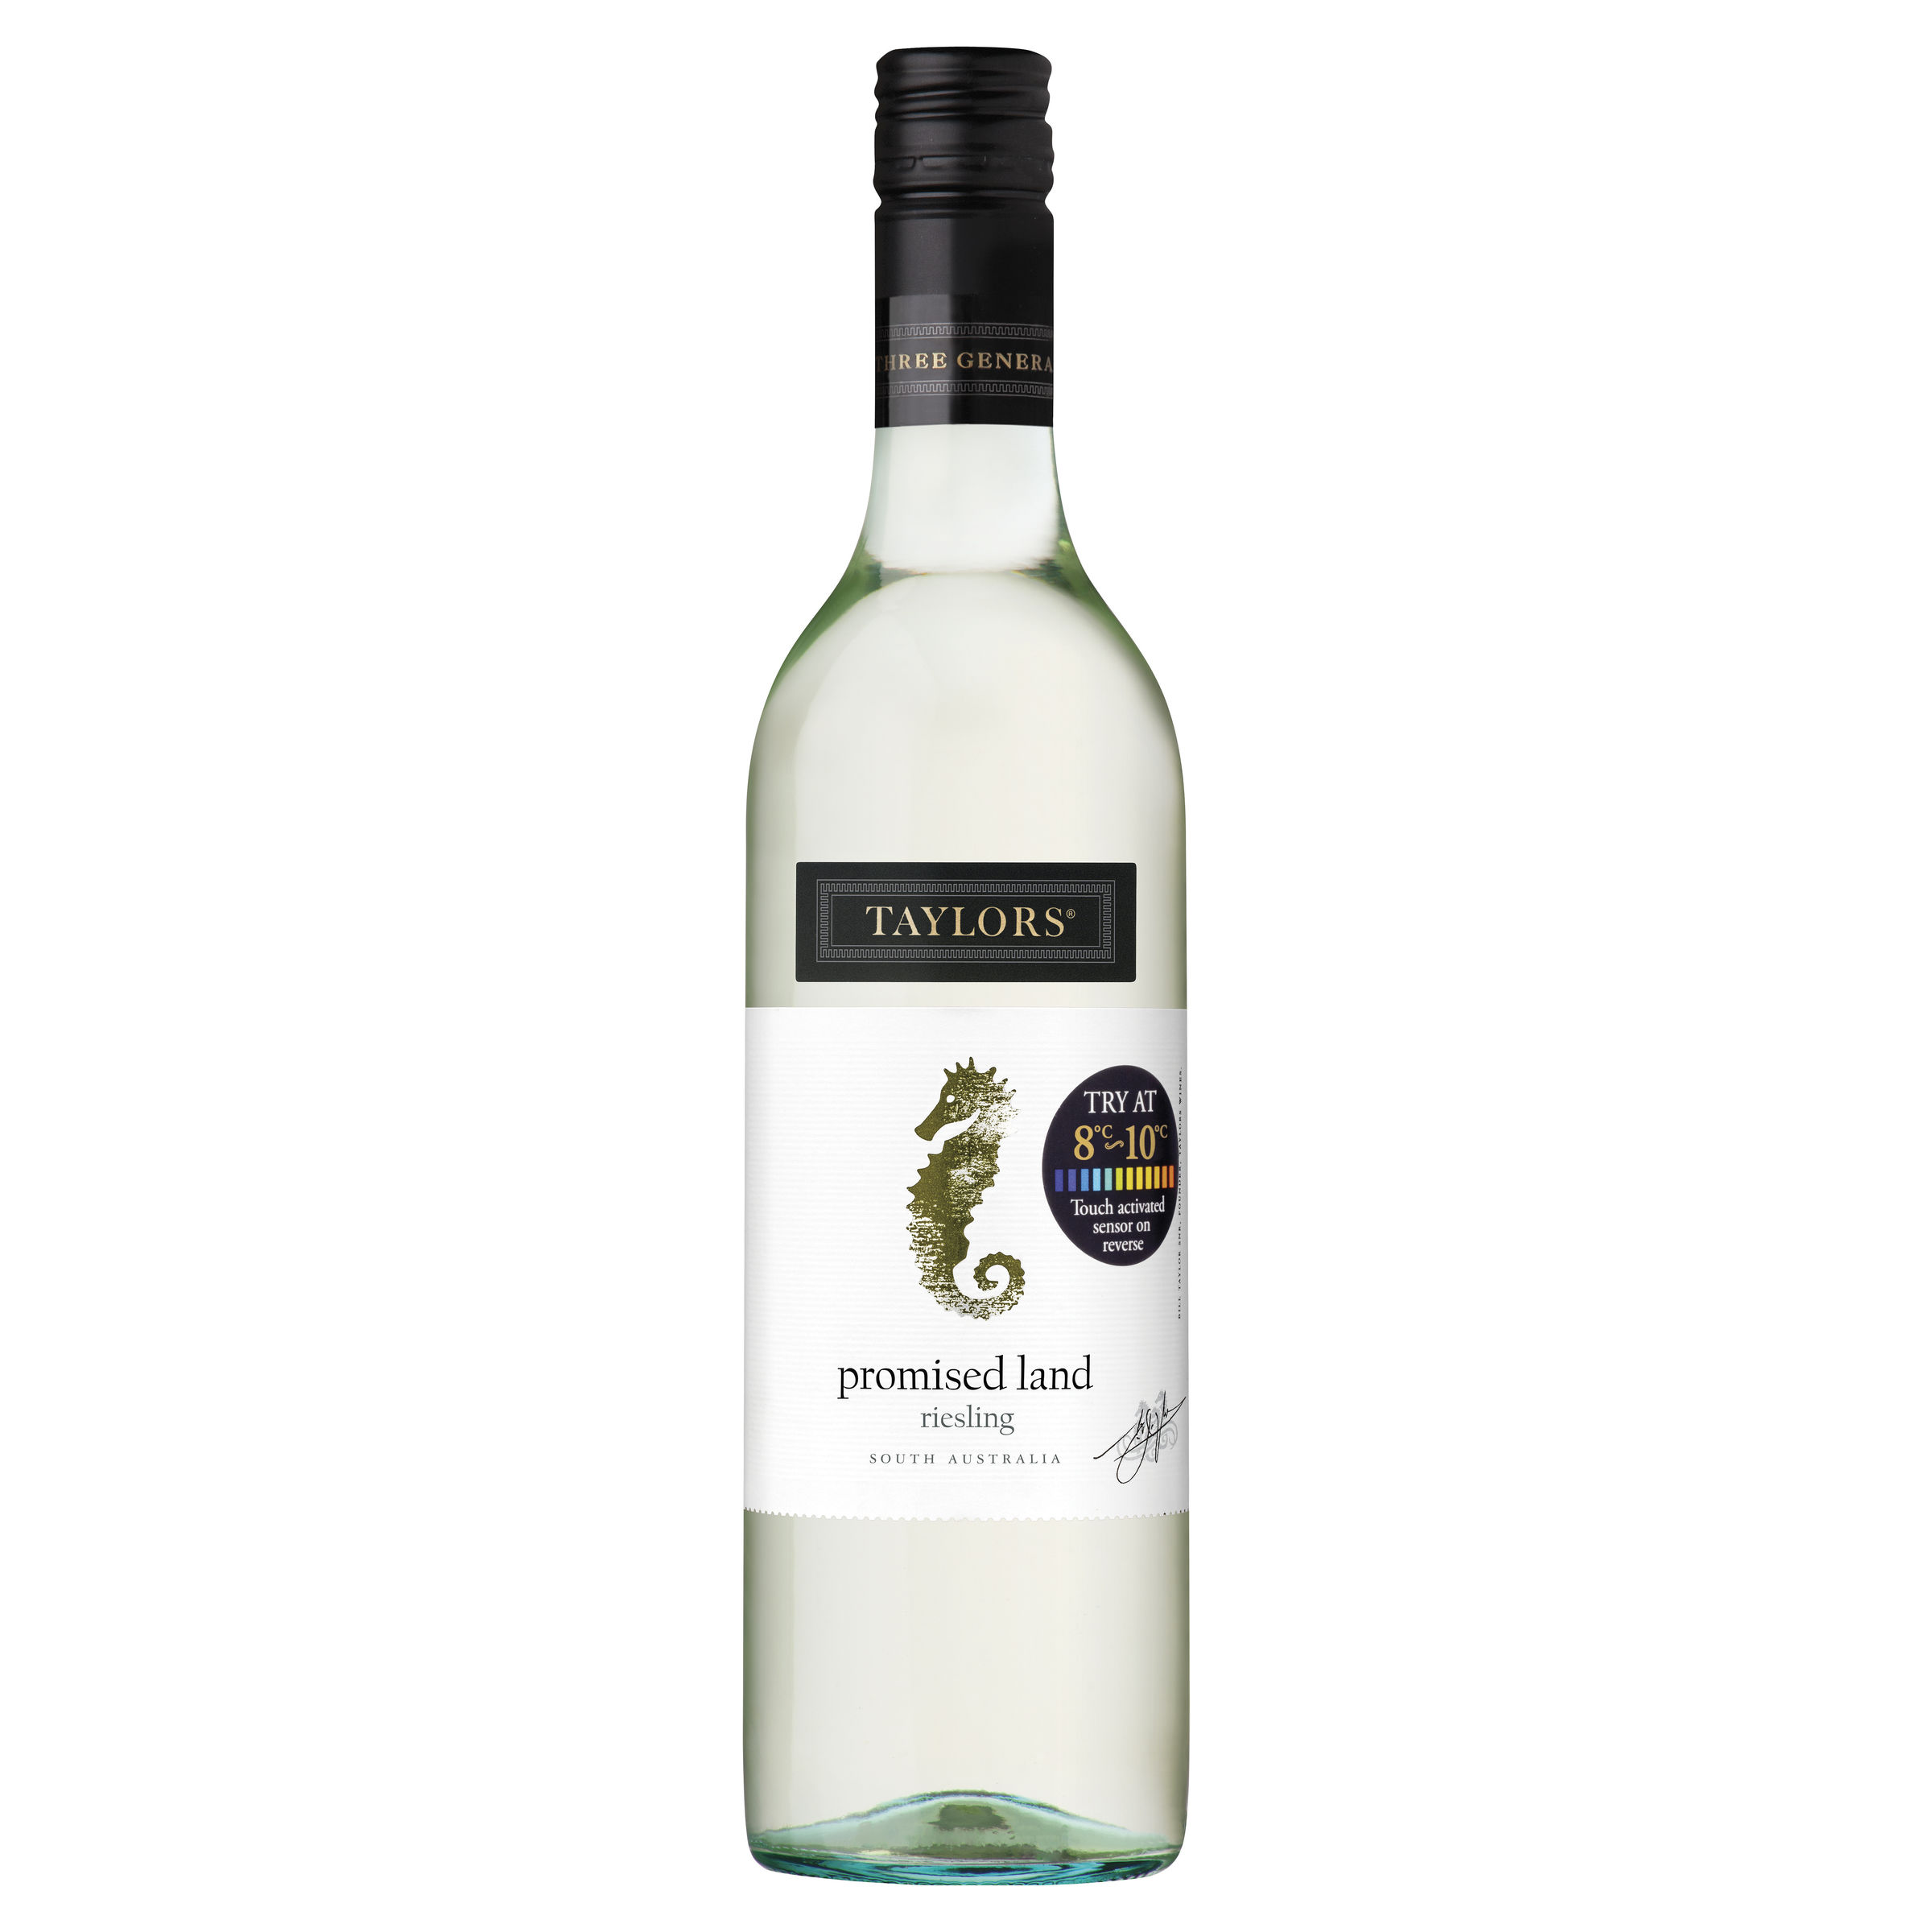 TAYLORS PROMISED LAND RIESLING